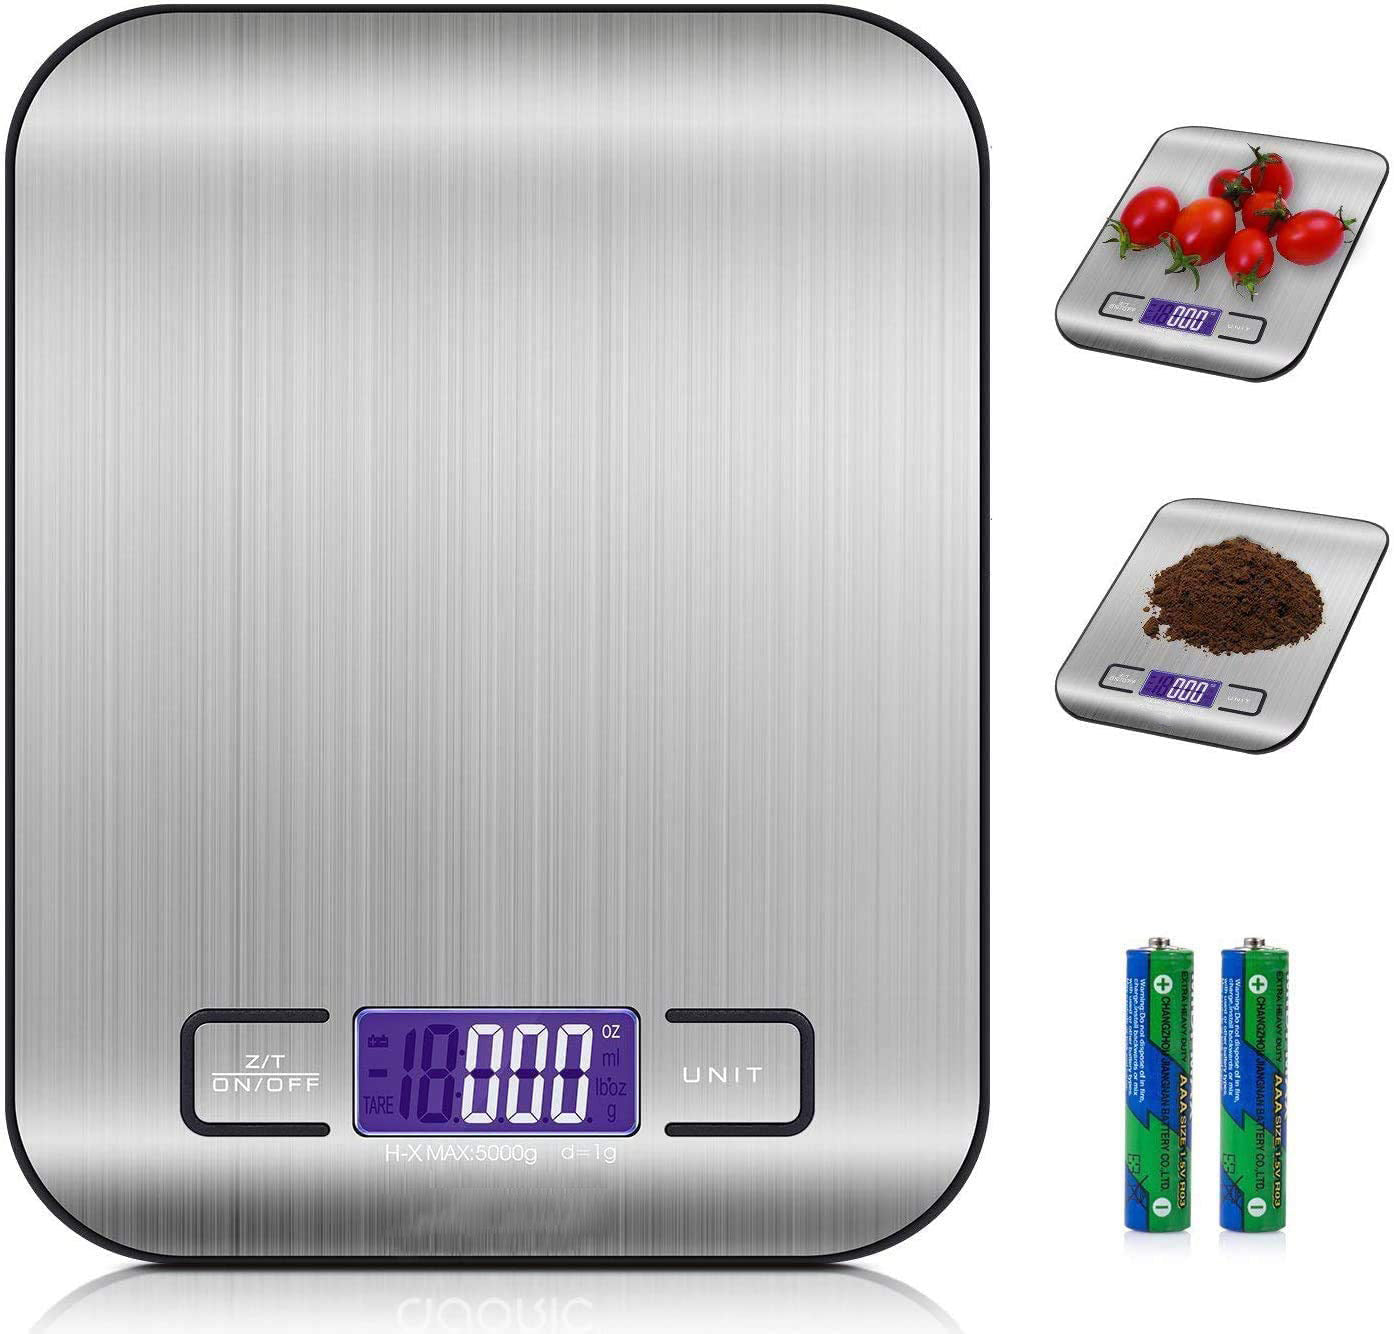  Highly Digital Kitchen Food Scale,LCD Display with Backlight Kitchen  Scale,1g/0.1oz Precise Graduation,Measure Water and Milk Volume,5000 g / 11  lb,White : Home & Kitchen